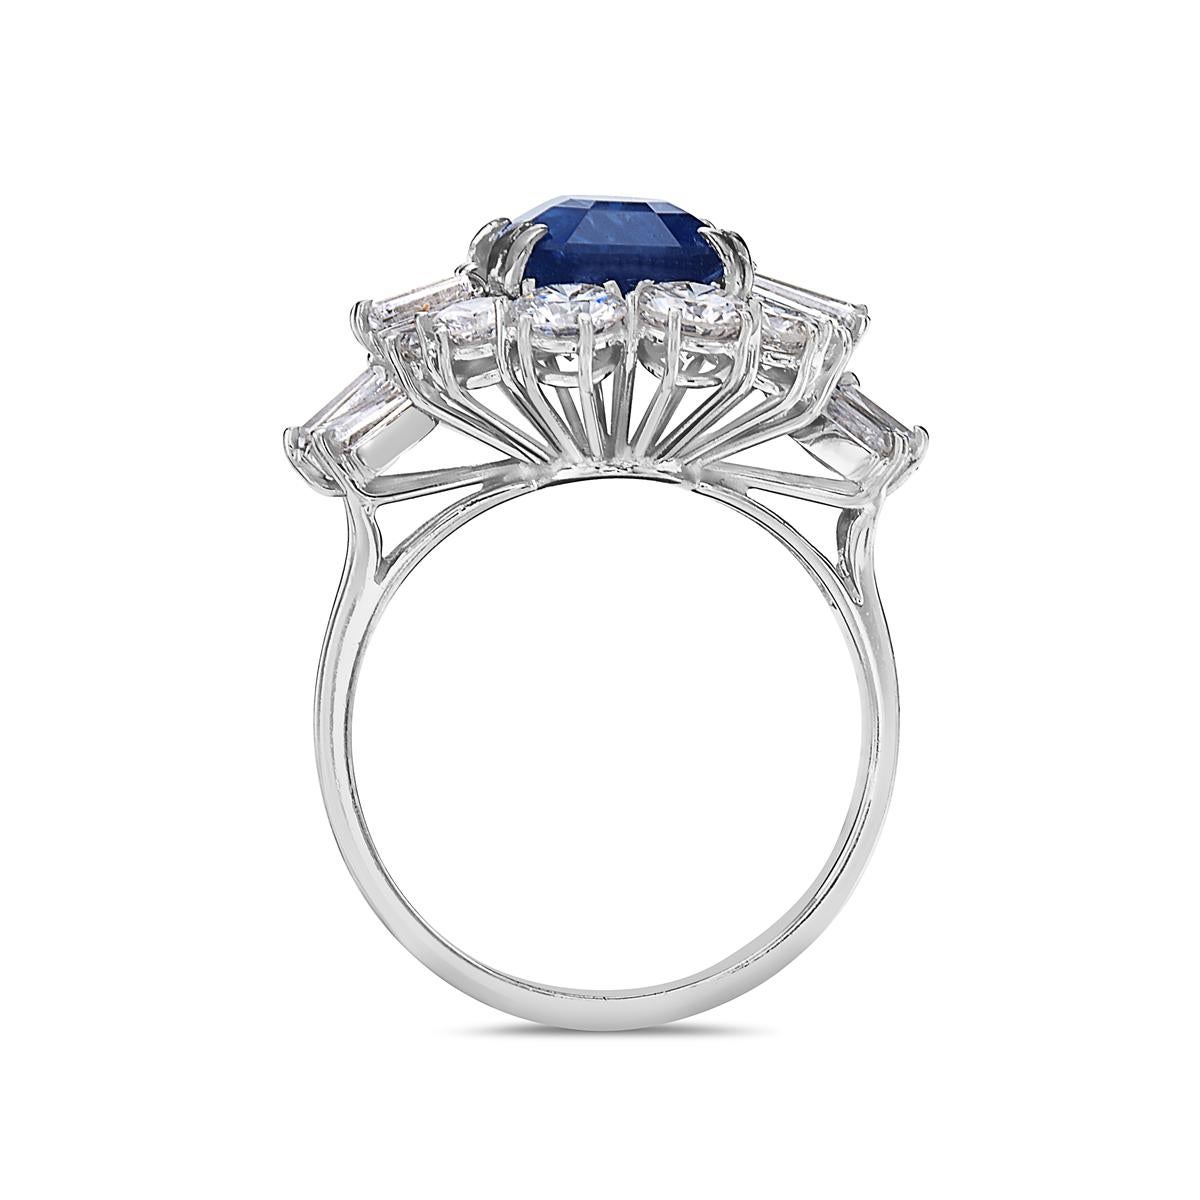 This ring features a 5.83 carat sapphire and 8 round diamonds, 14 baguettes weighing 3.60 carats set in white gold. Made in Italy. Size 7.5.

Resizeable upon request.

Viewings available in our NYC showroom by appointment.
 